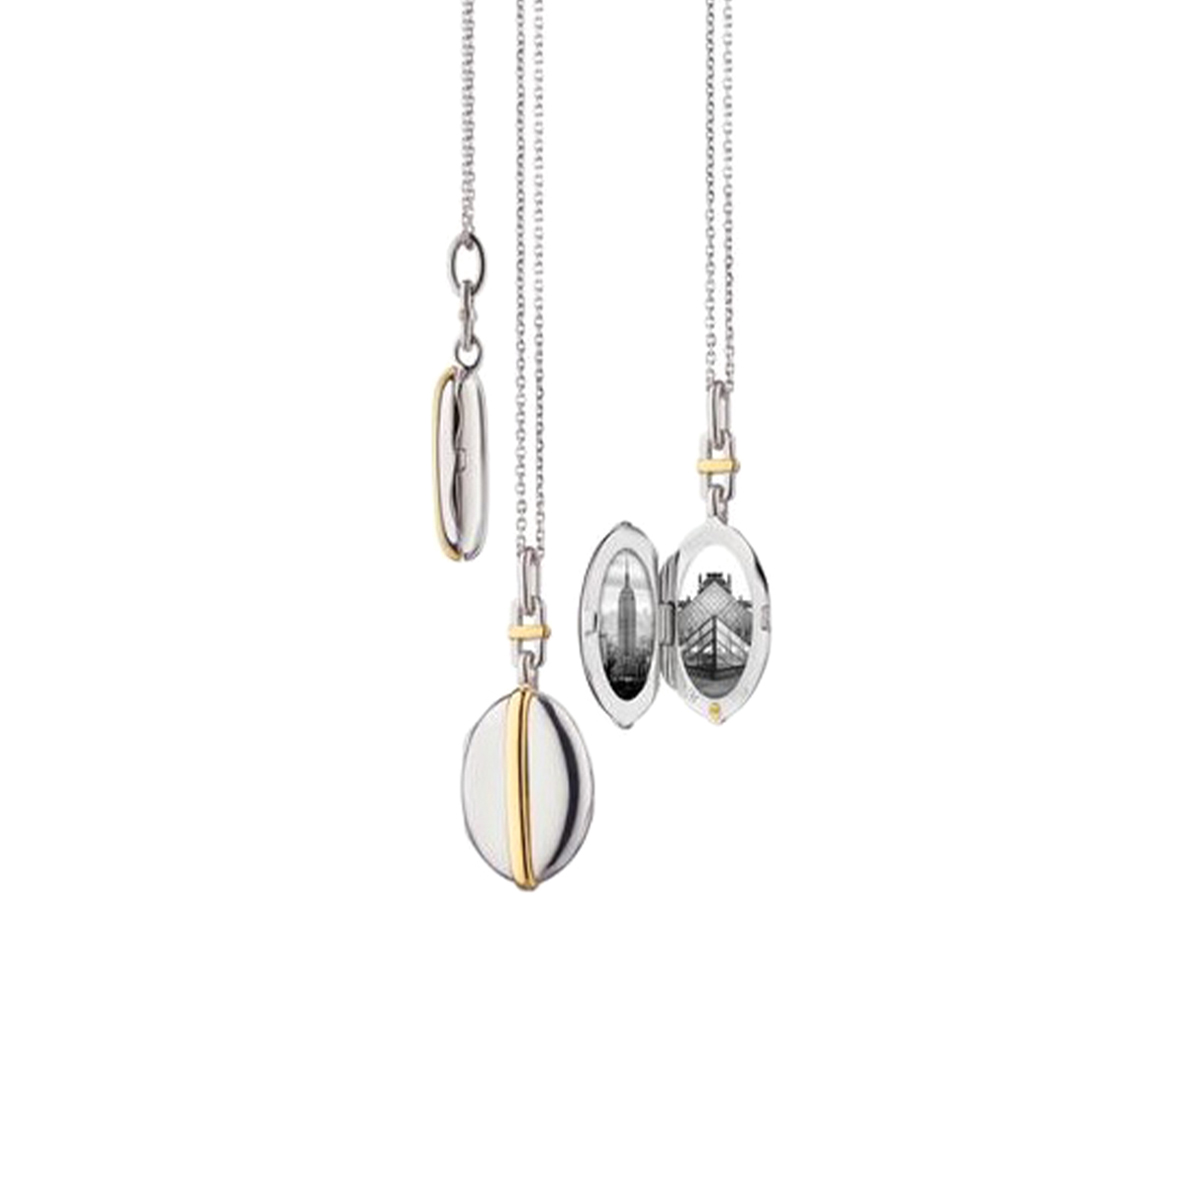 Two-Tone Slim Oval Tess Locket with Chain